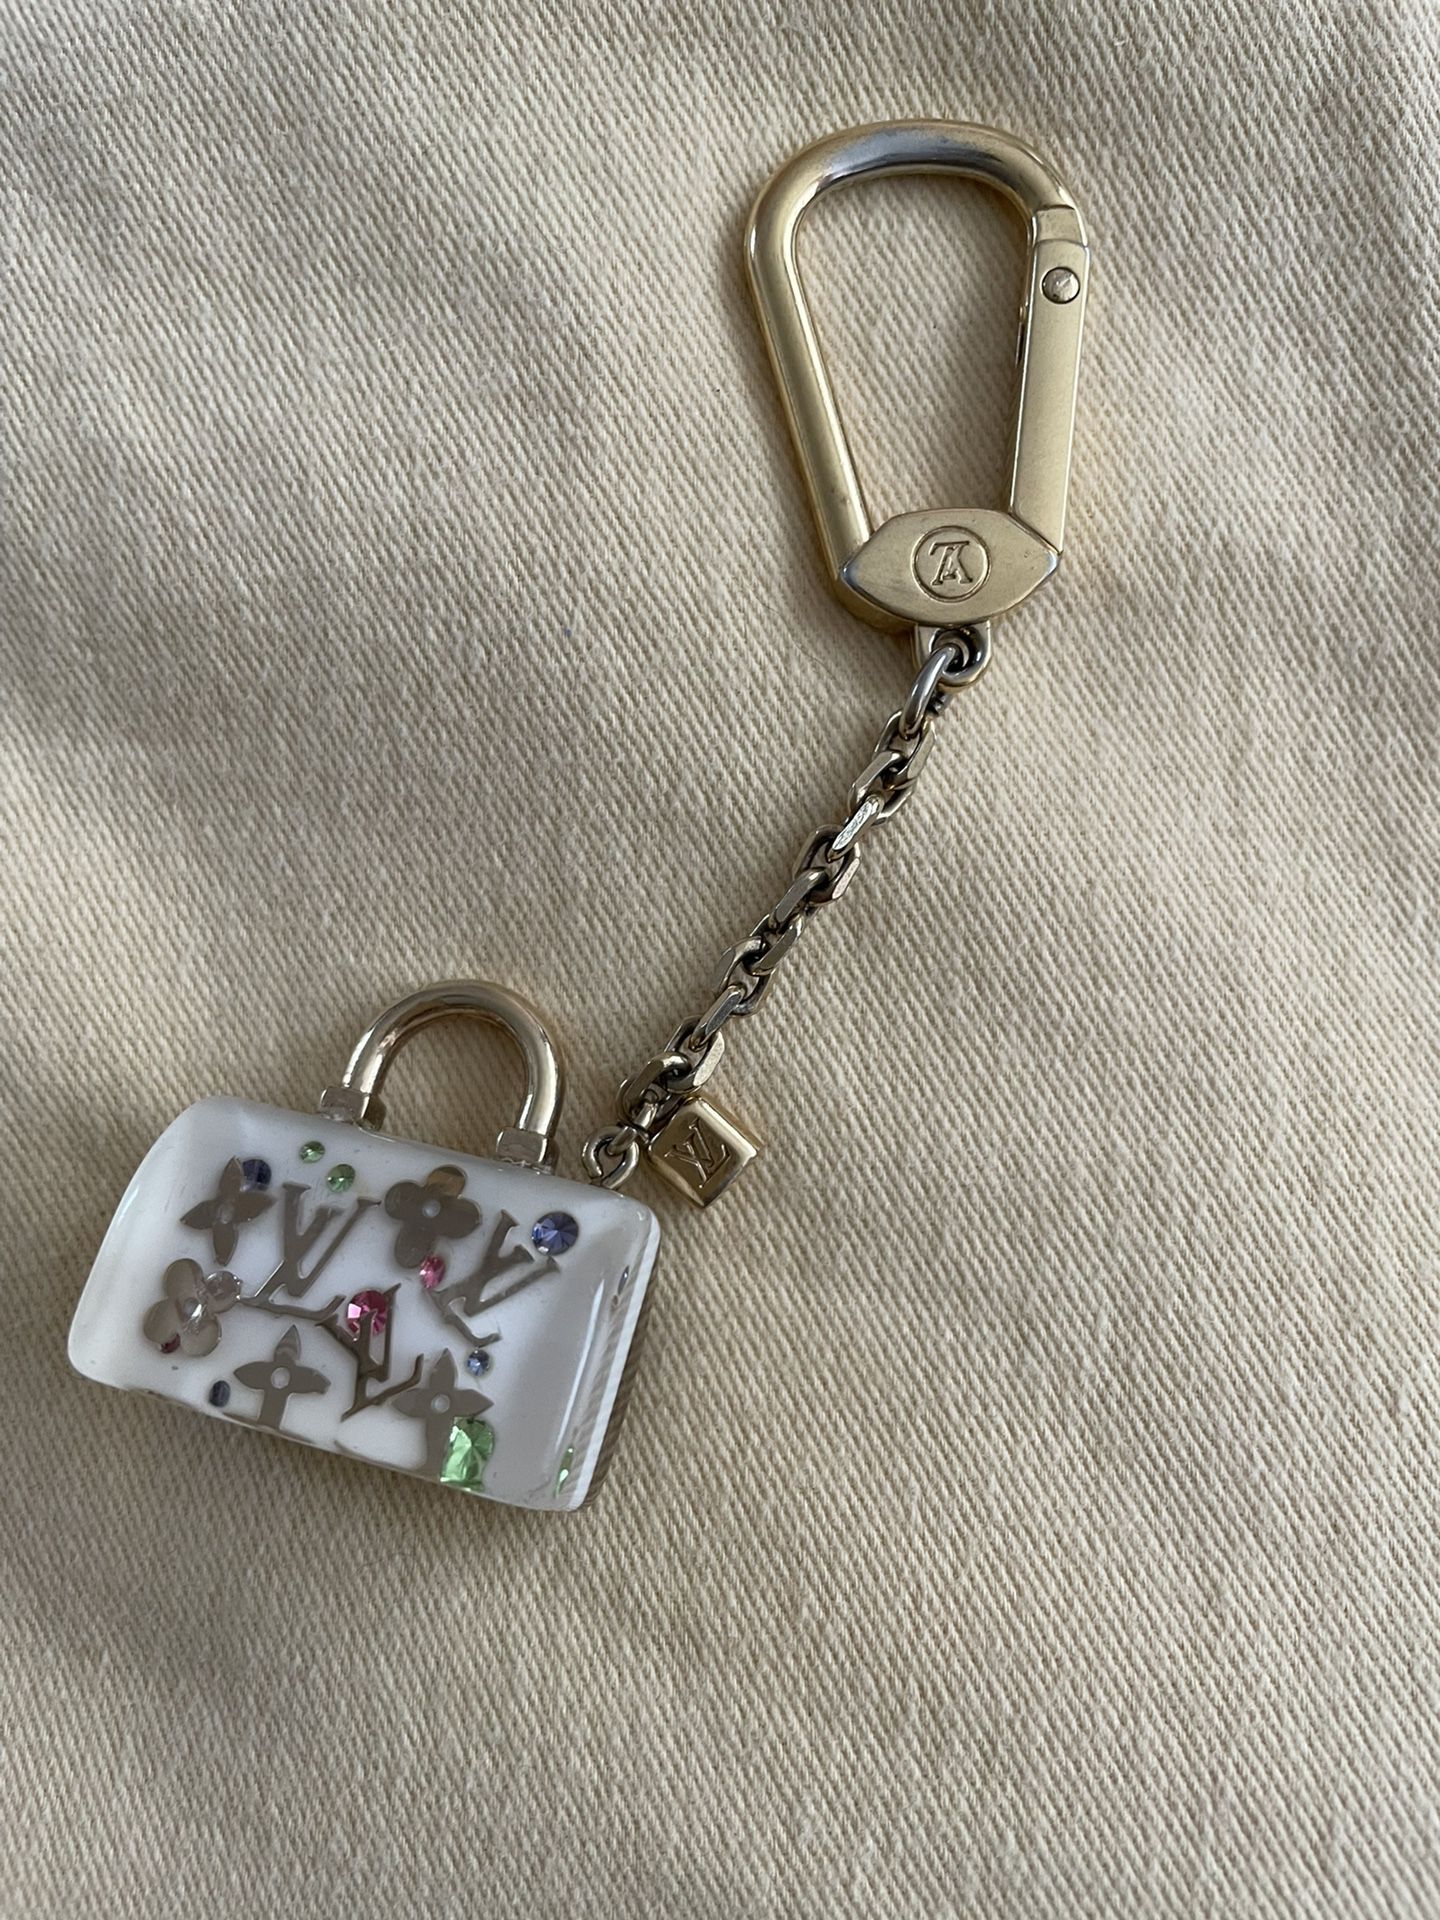 LOUIS VUITTON Porte Cles Speedy inclusion White Bag Charm Key Ring Keychain  for Sale in New Milford, NJ - OfferUp